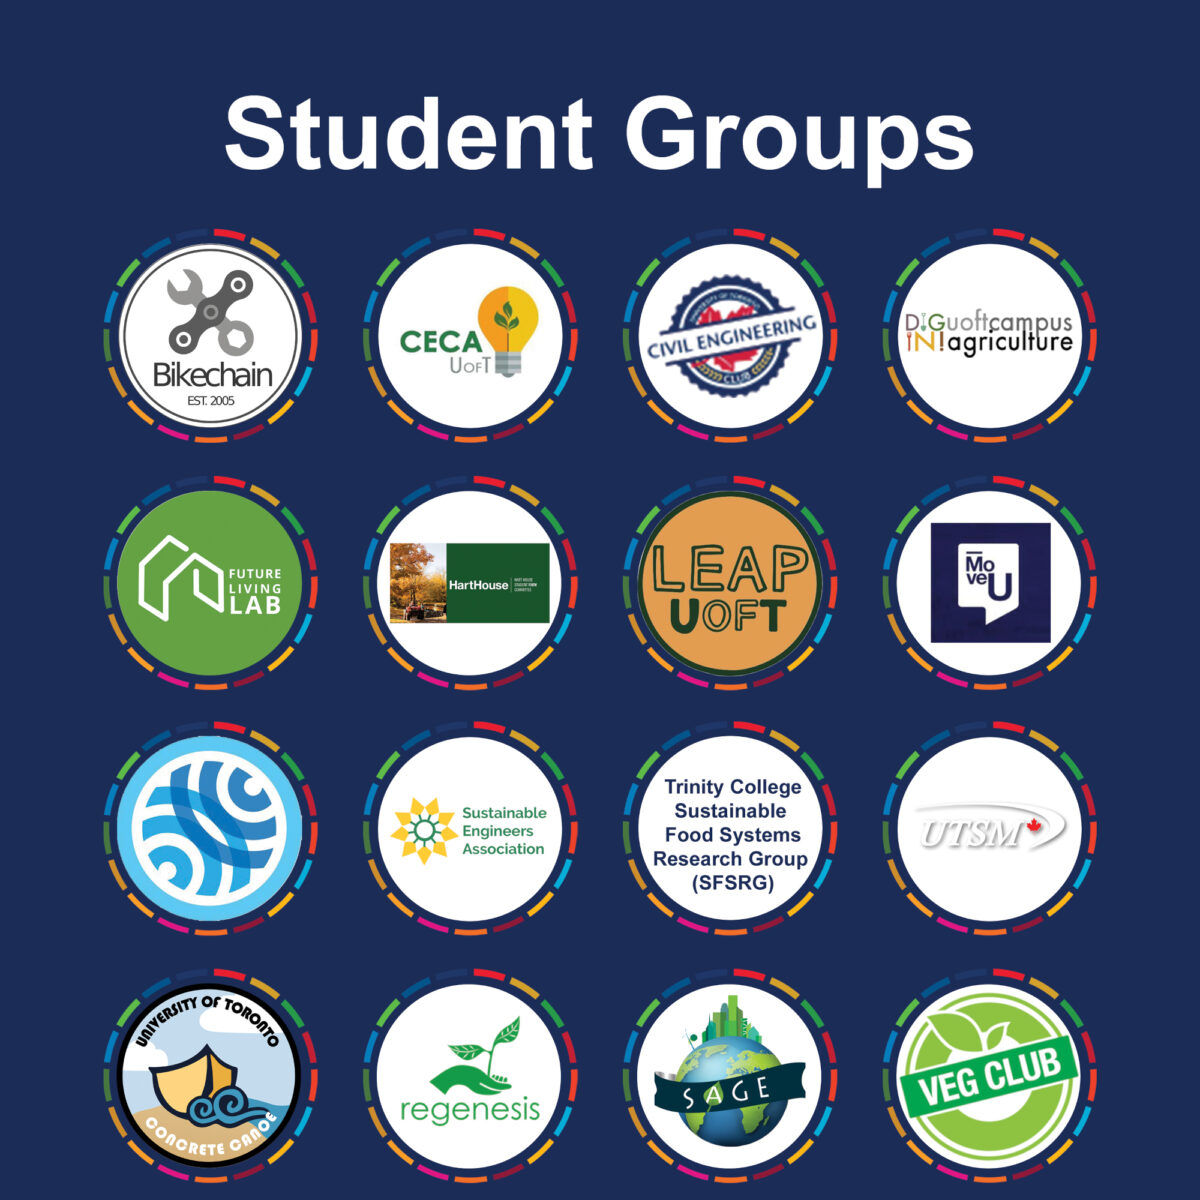 Student Groups Info Graphic, showing the logos of the different sustainability student groups who participated in the Celebration